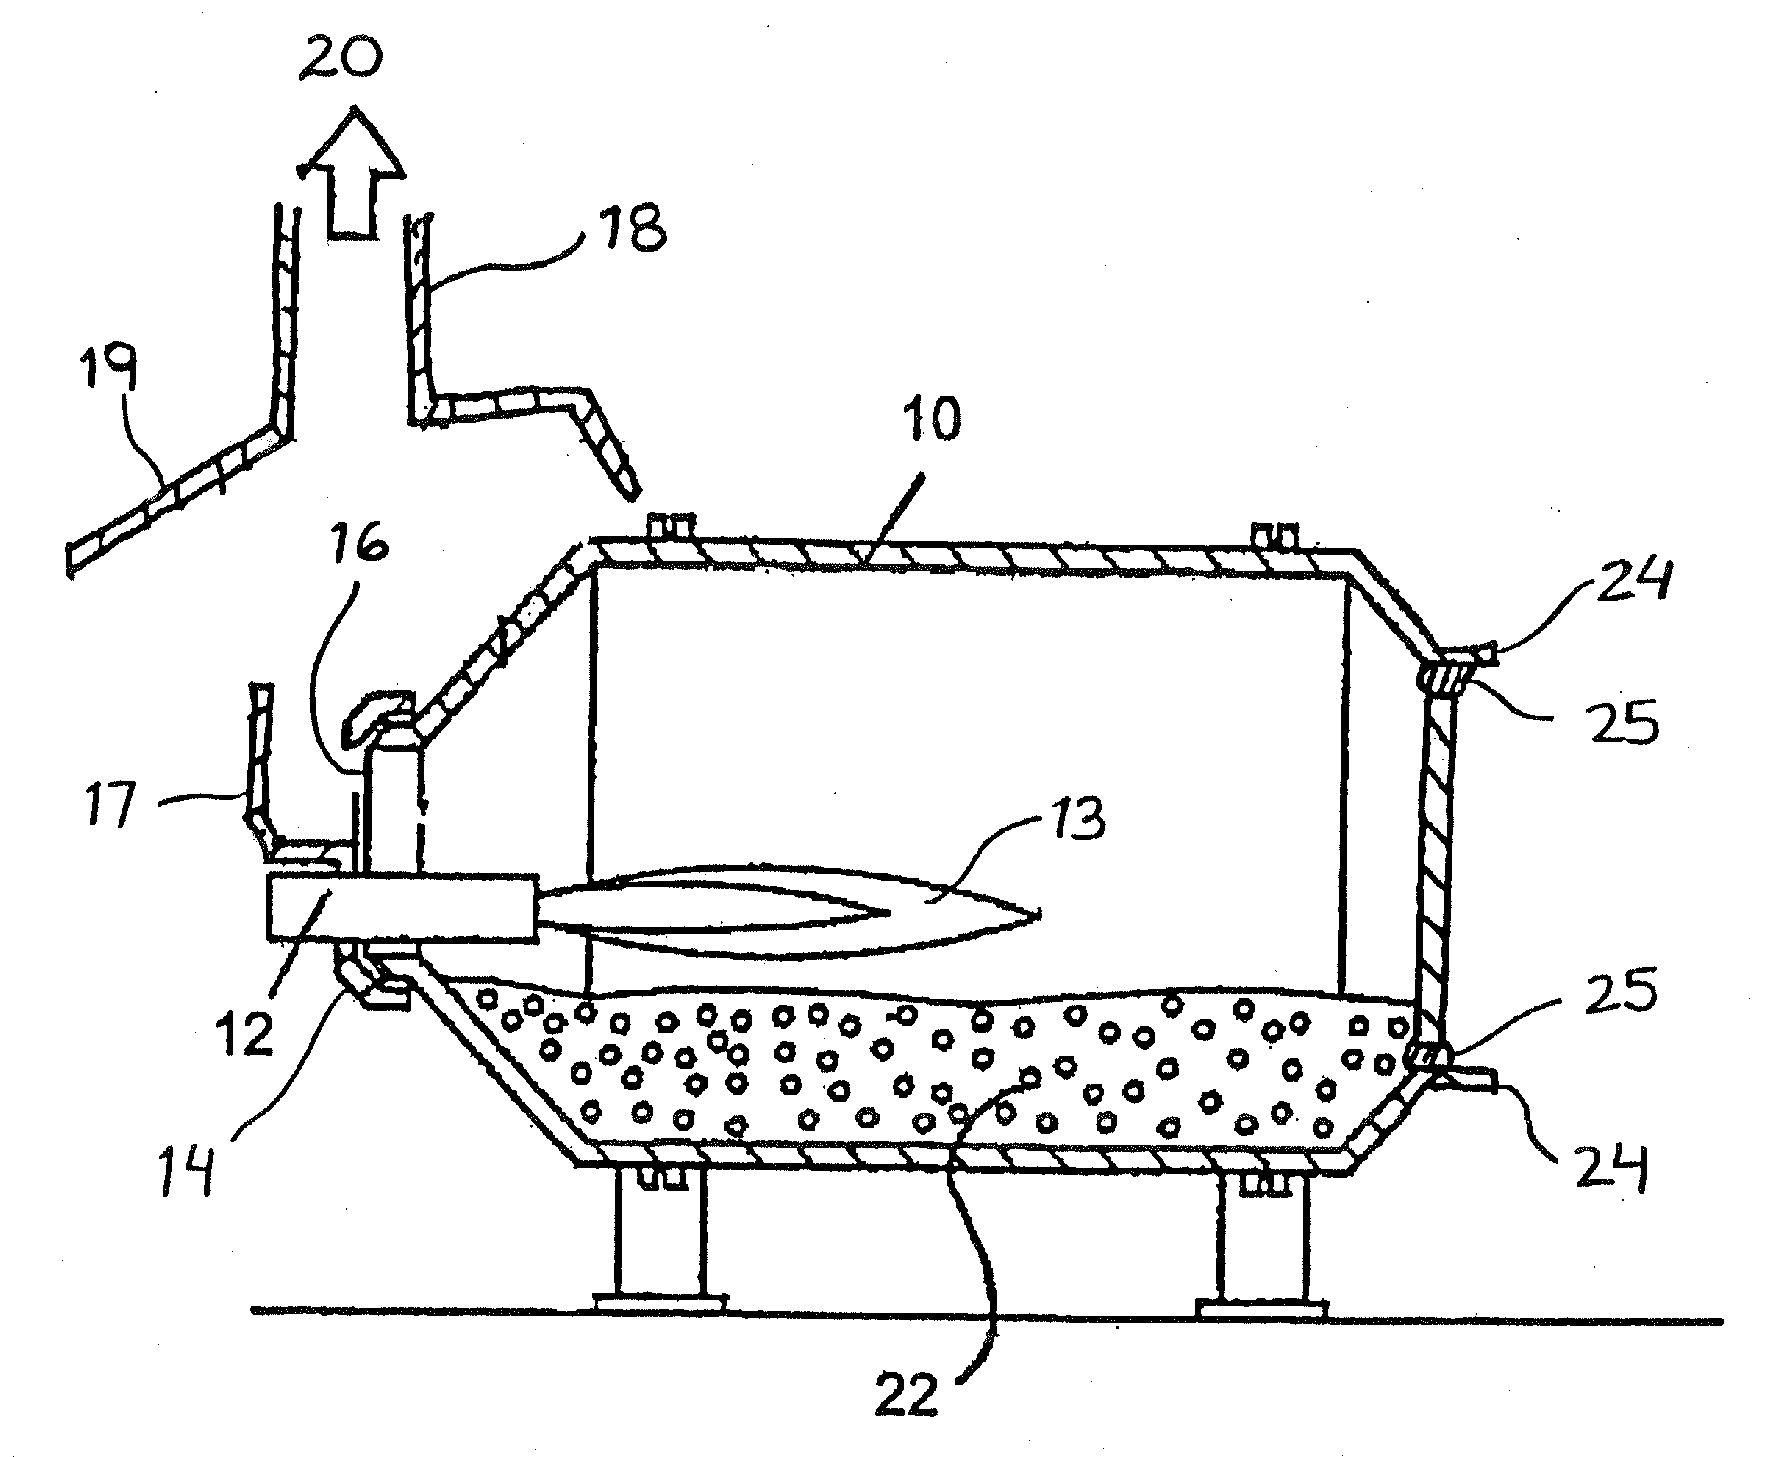 Process and apparatus for purifying low-grand silicon material